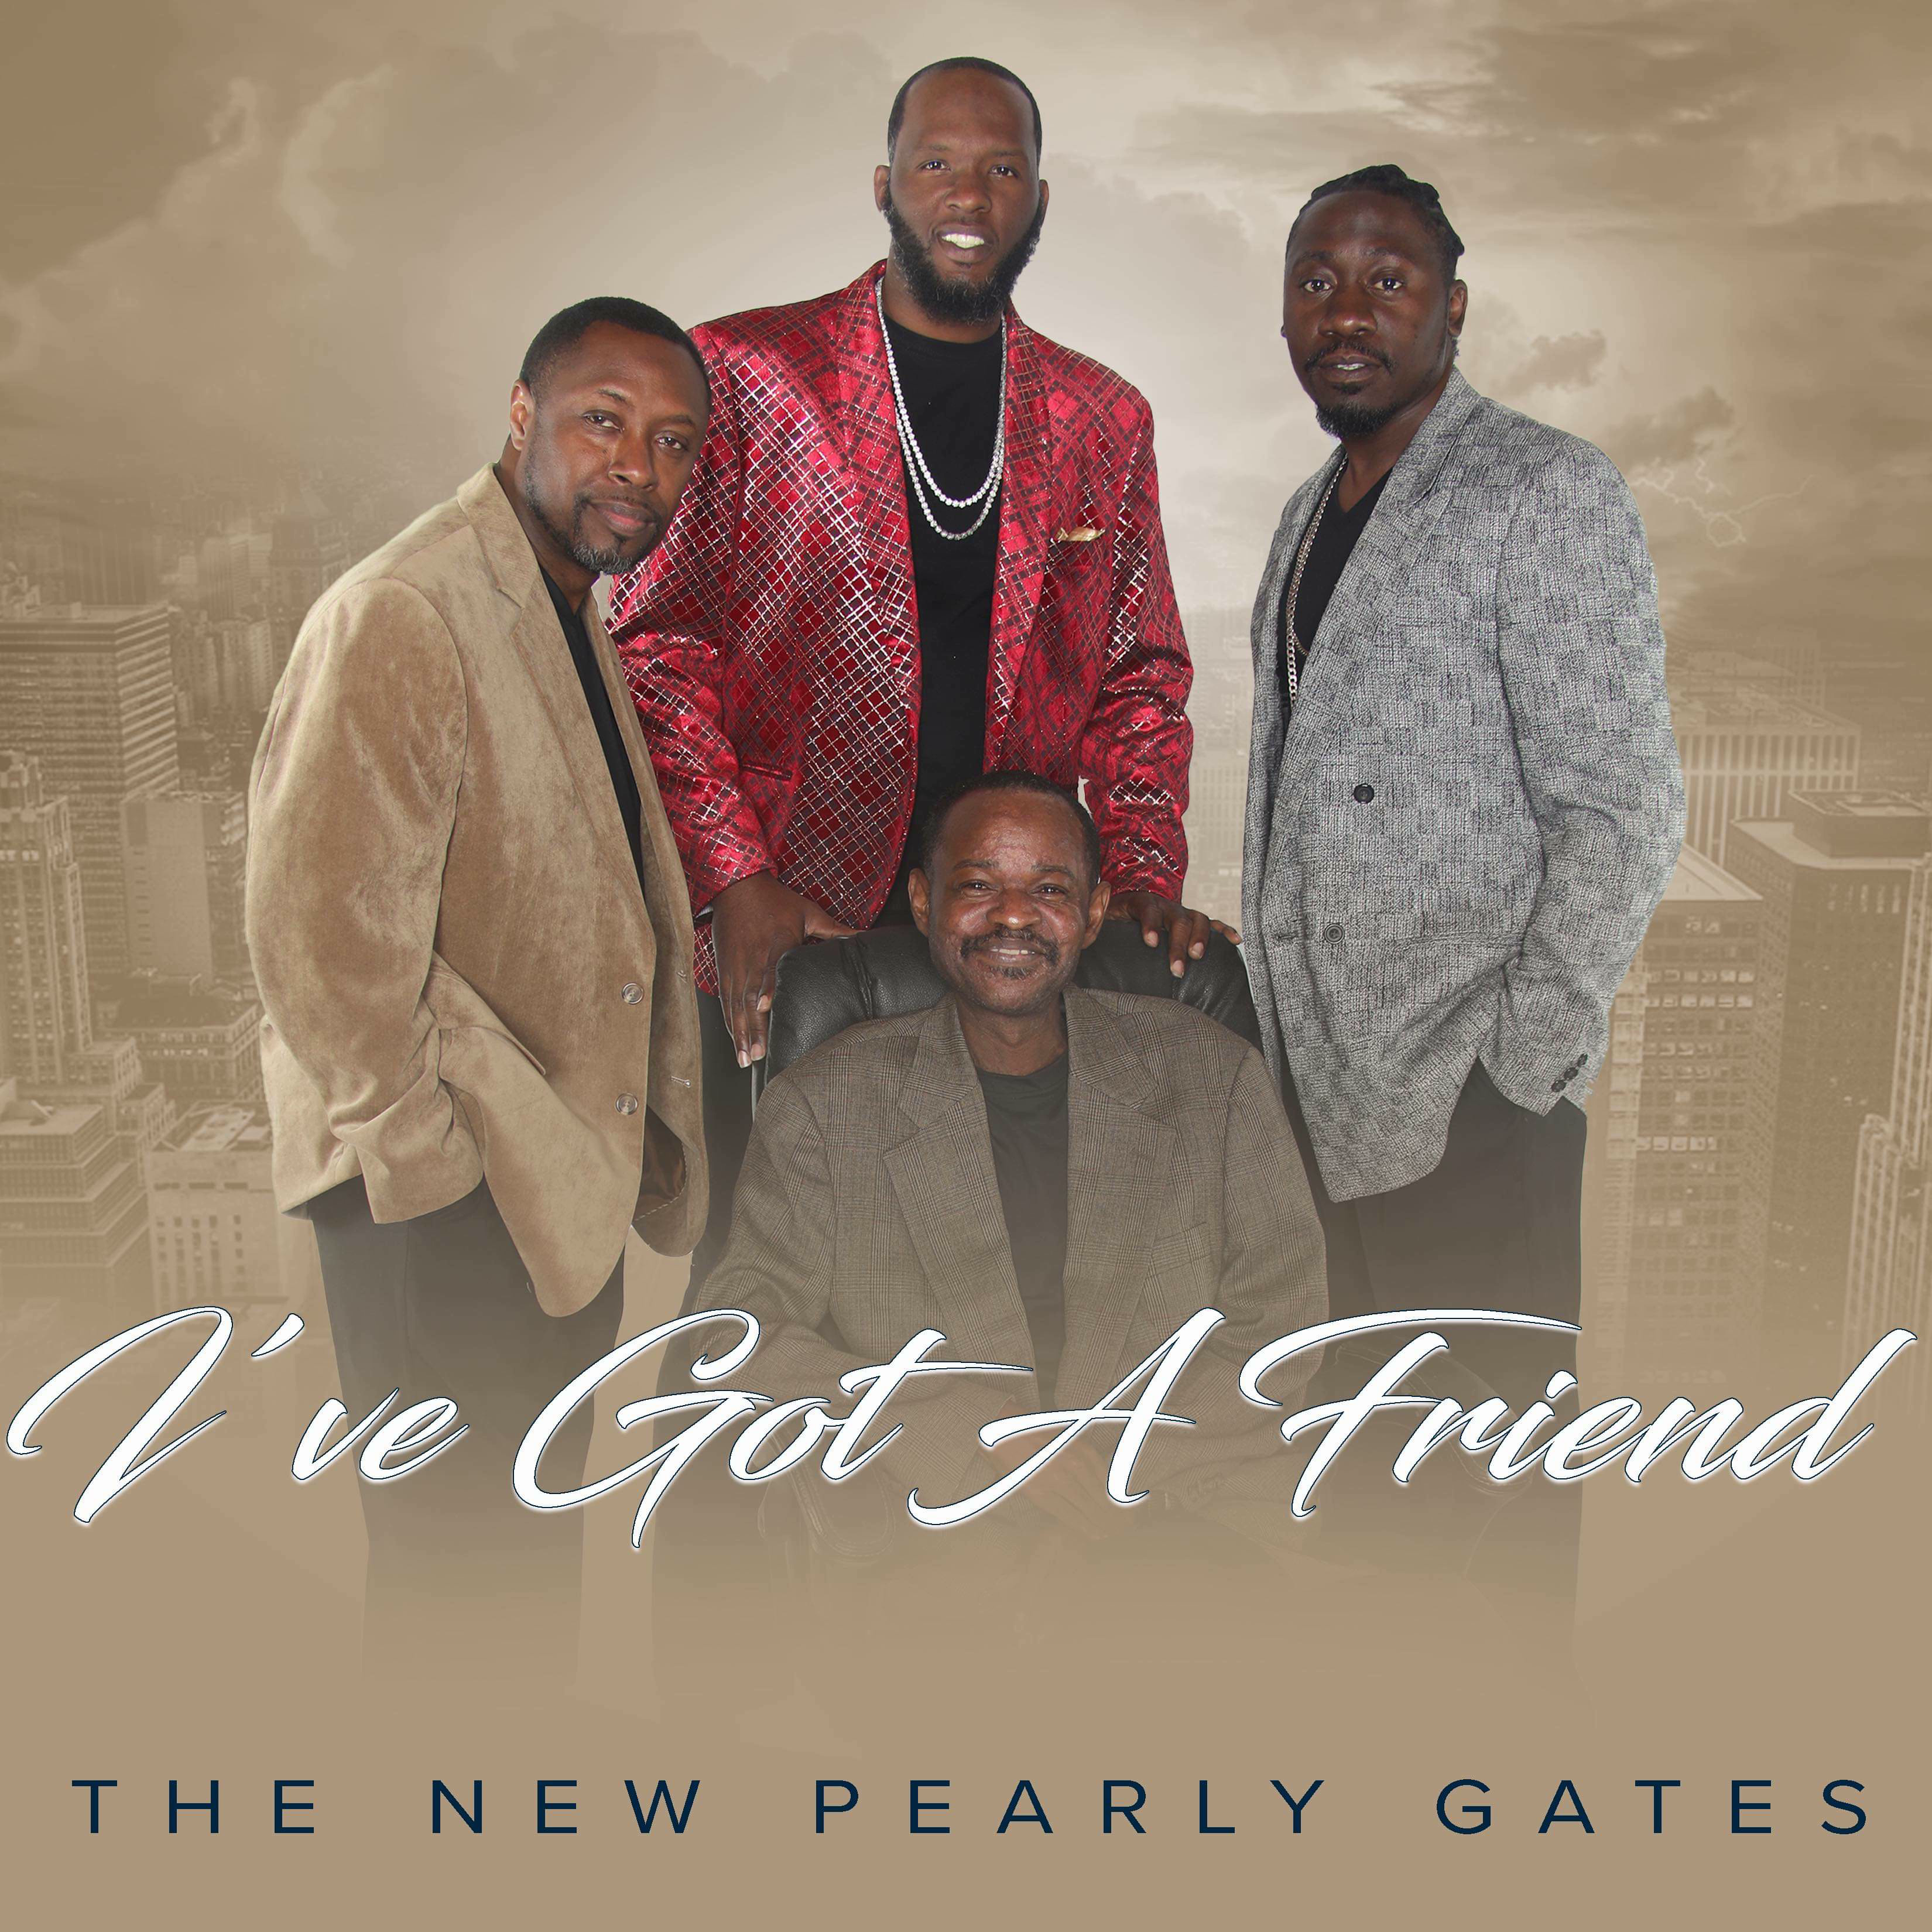 The New Pearly Gates - I've Got A Friend